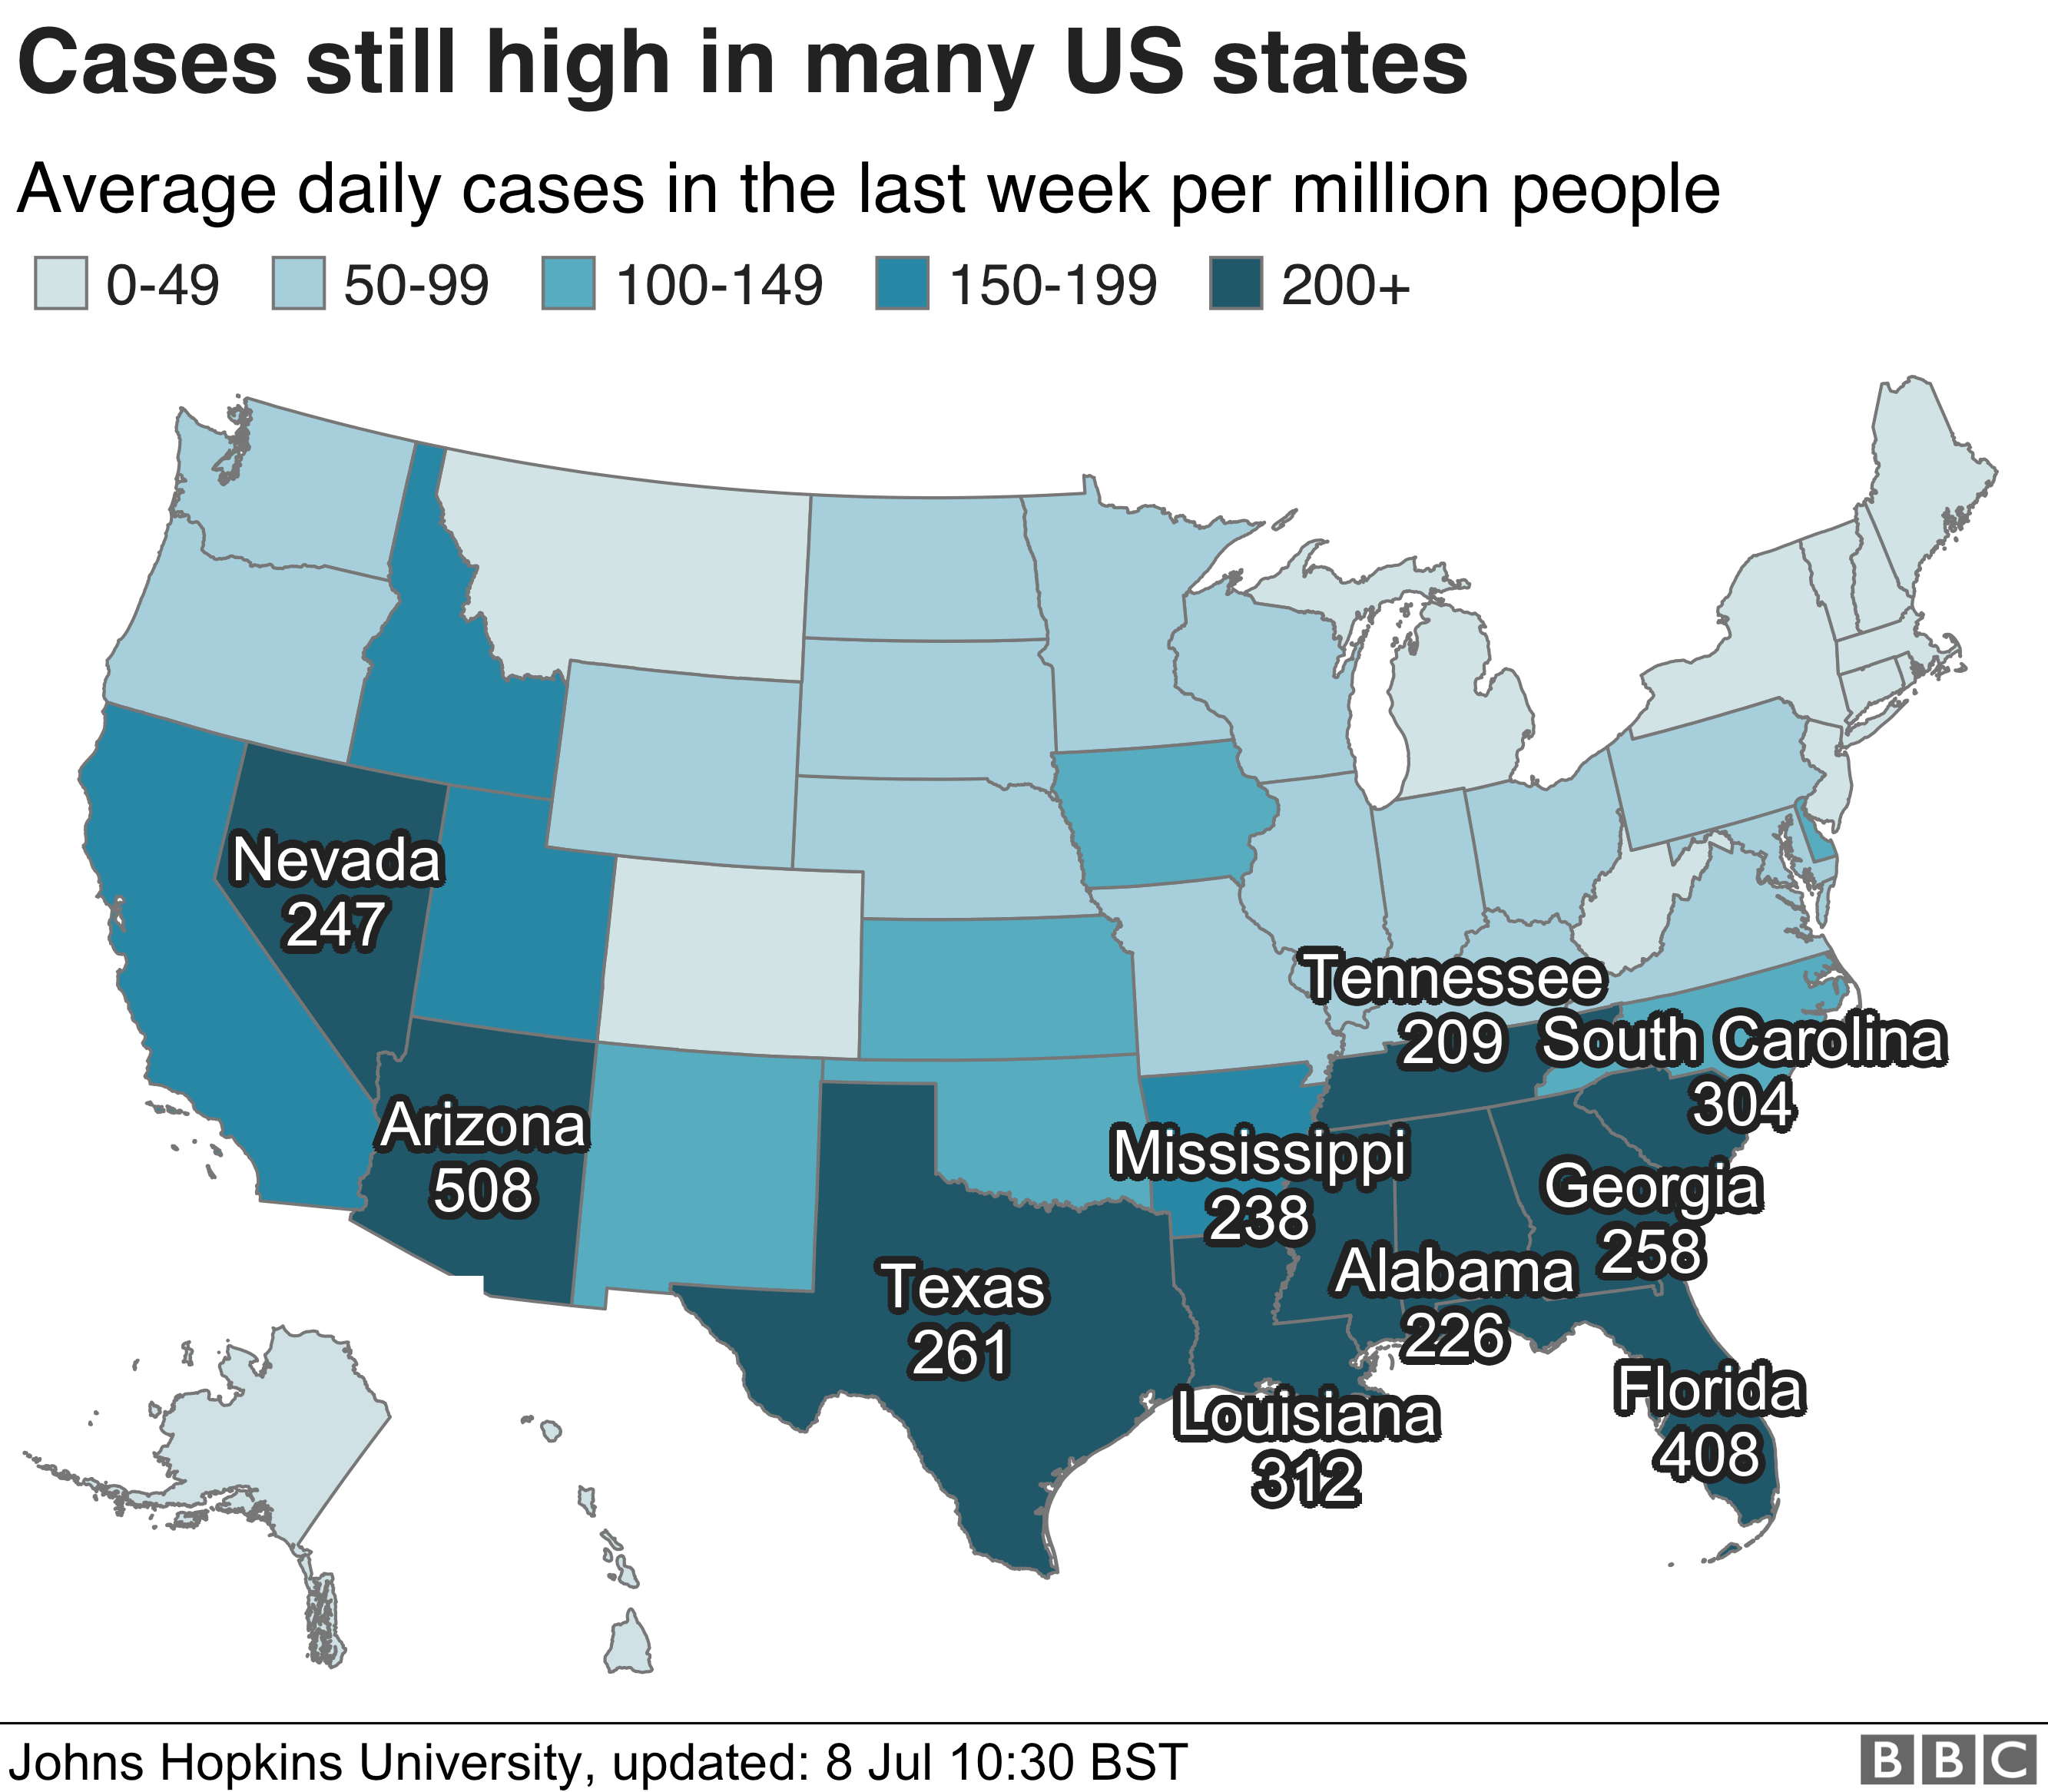 Map showing US states by number of cases per million people